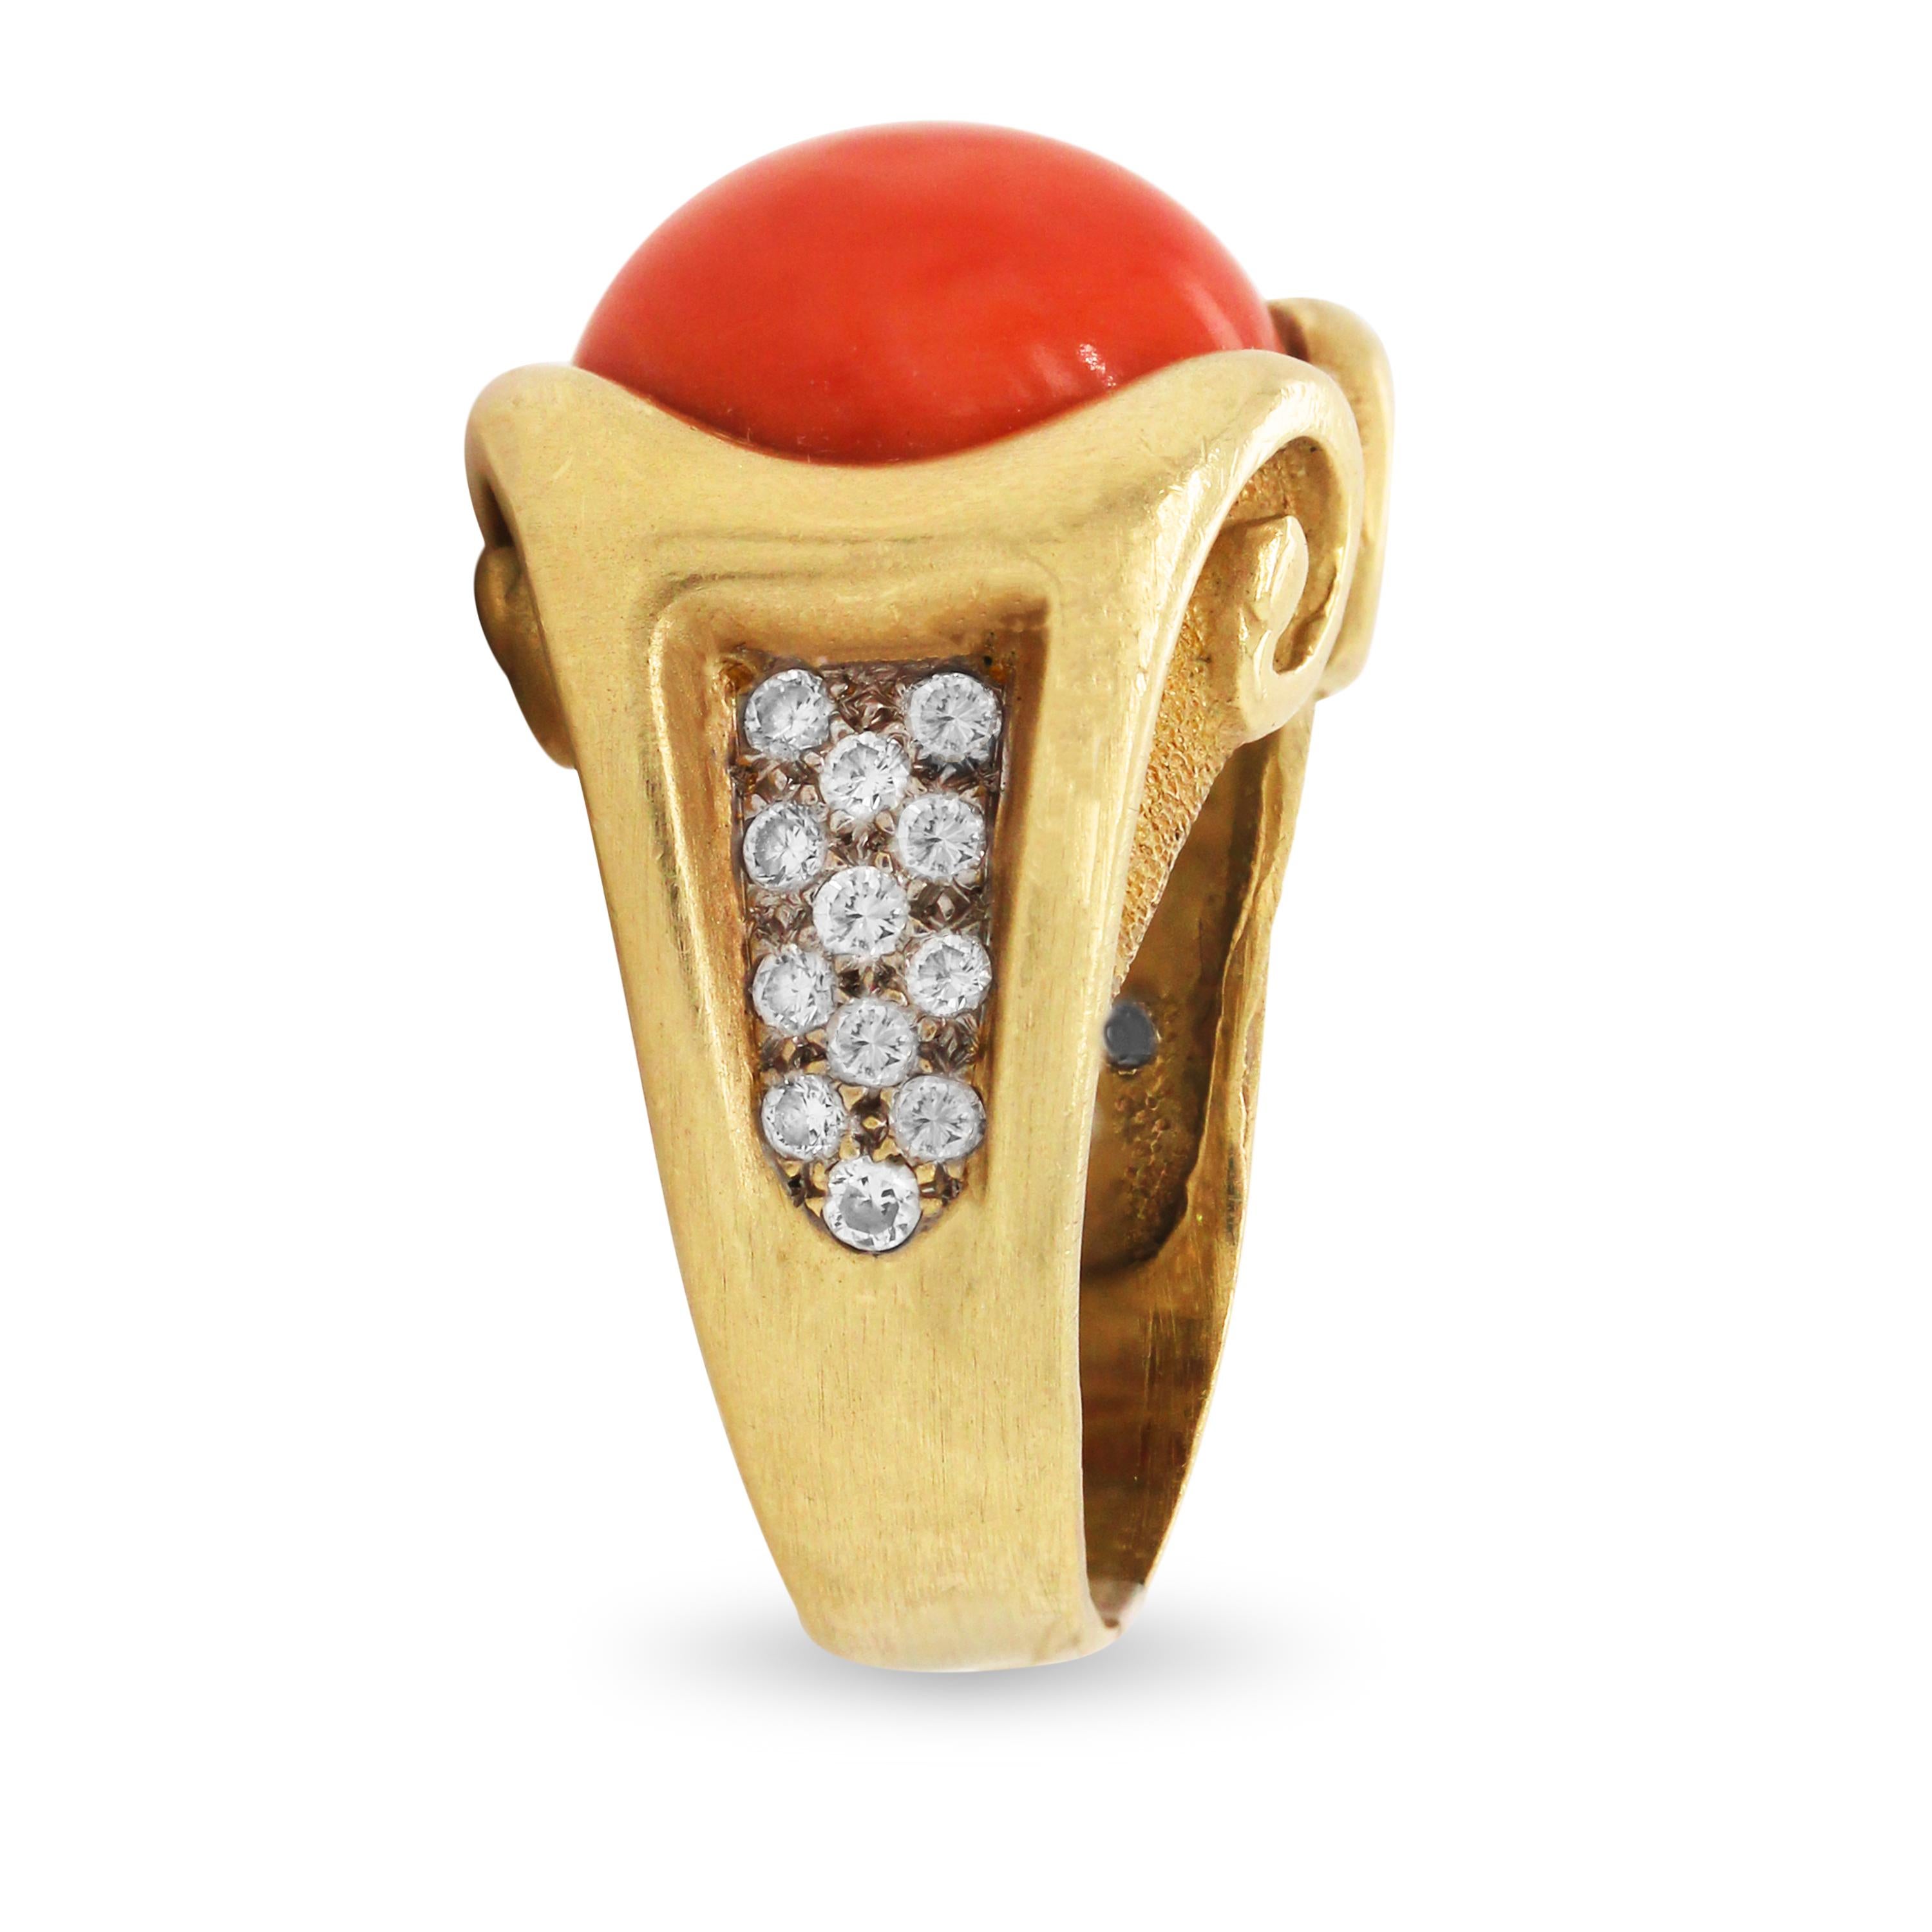 18K Yellow Gold and Diamond Round Sardinian Coral Center Cocktail Ring

Apprx. 0.80 carat diamonds total weight. 

10.00 carat apprx. Sardinian Coral center. Coral is round.

17.25mm face width. 5.75mm band width.

Size 8.75. Sizable by request.